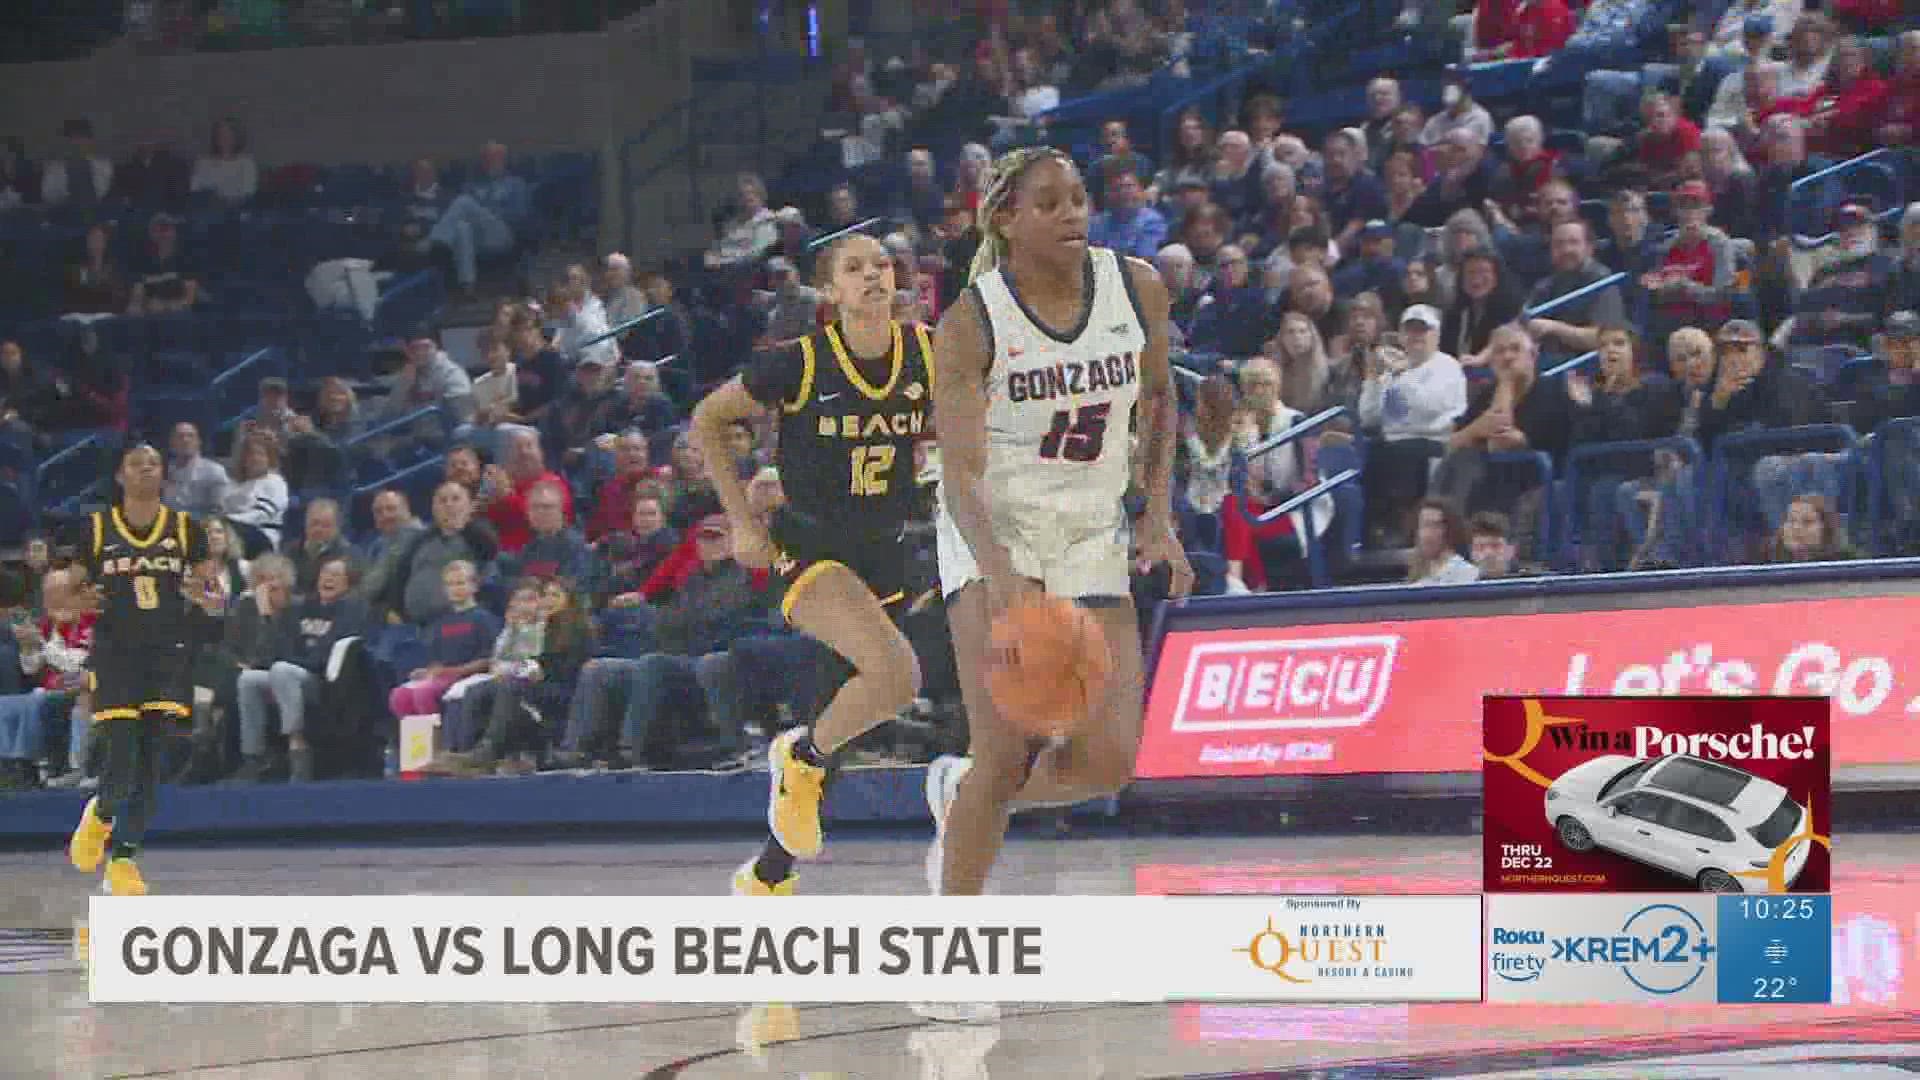 Gonzaga women's basketball opened its season with an emphatic 80-54 win over Long Beach State in the kennel.